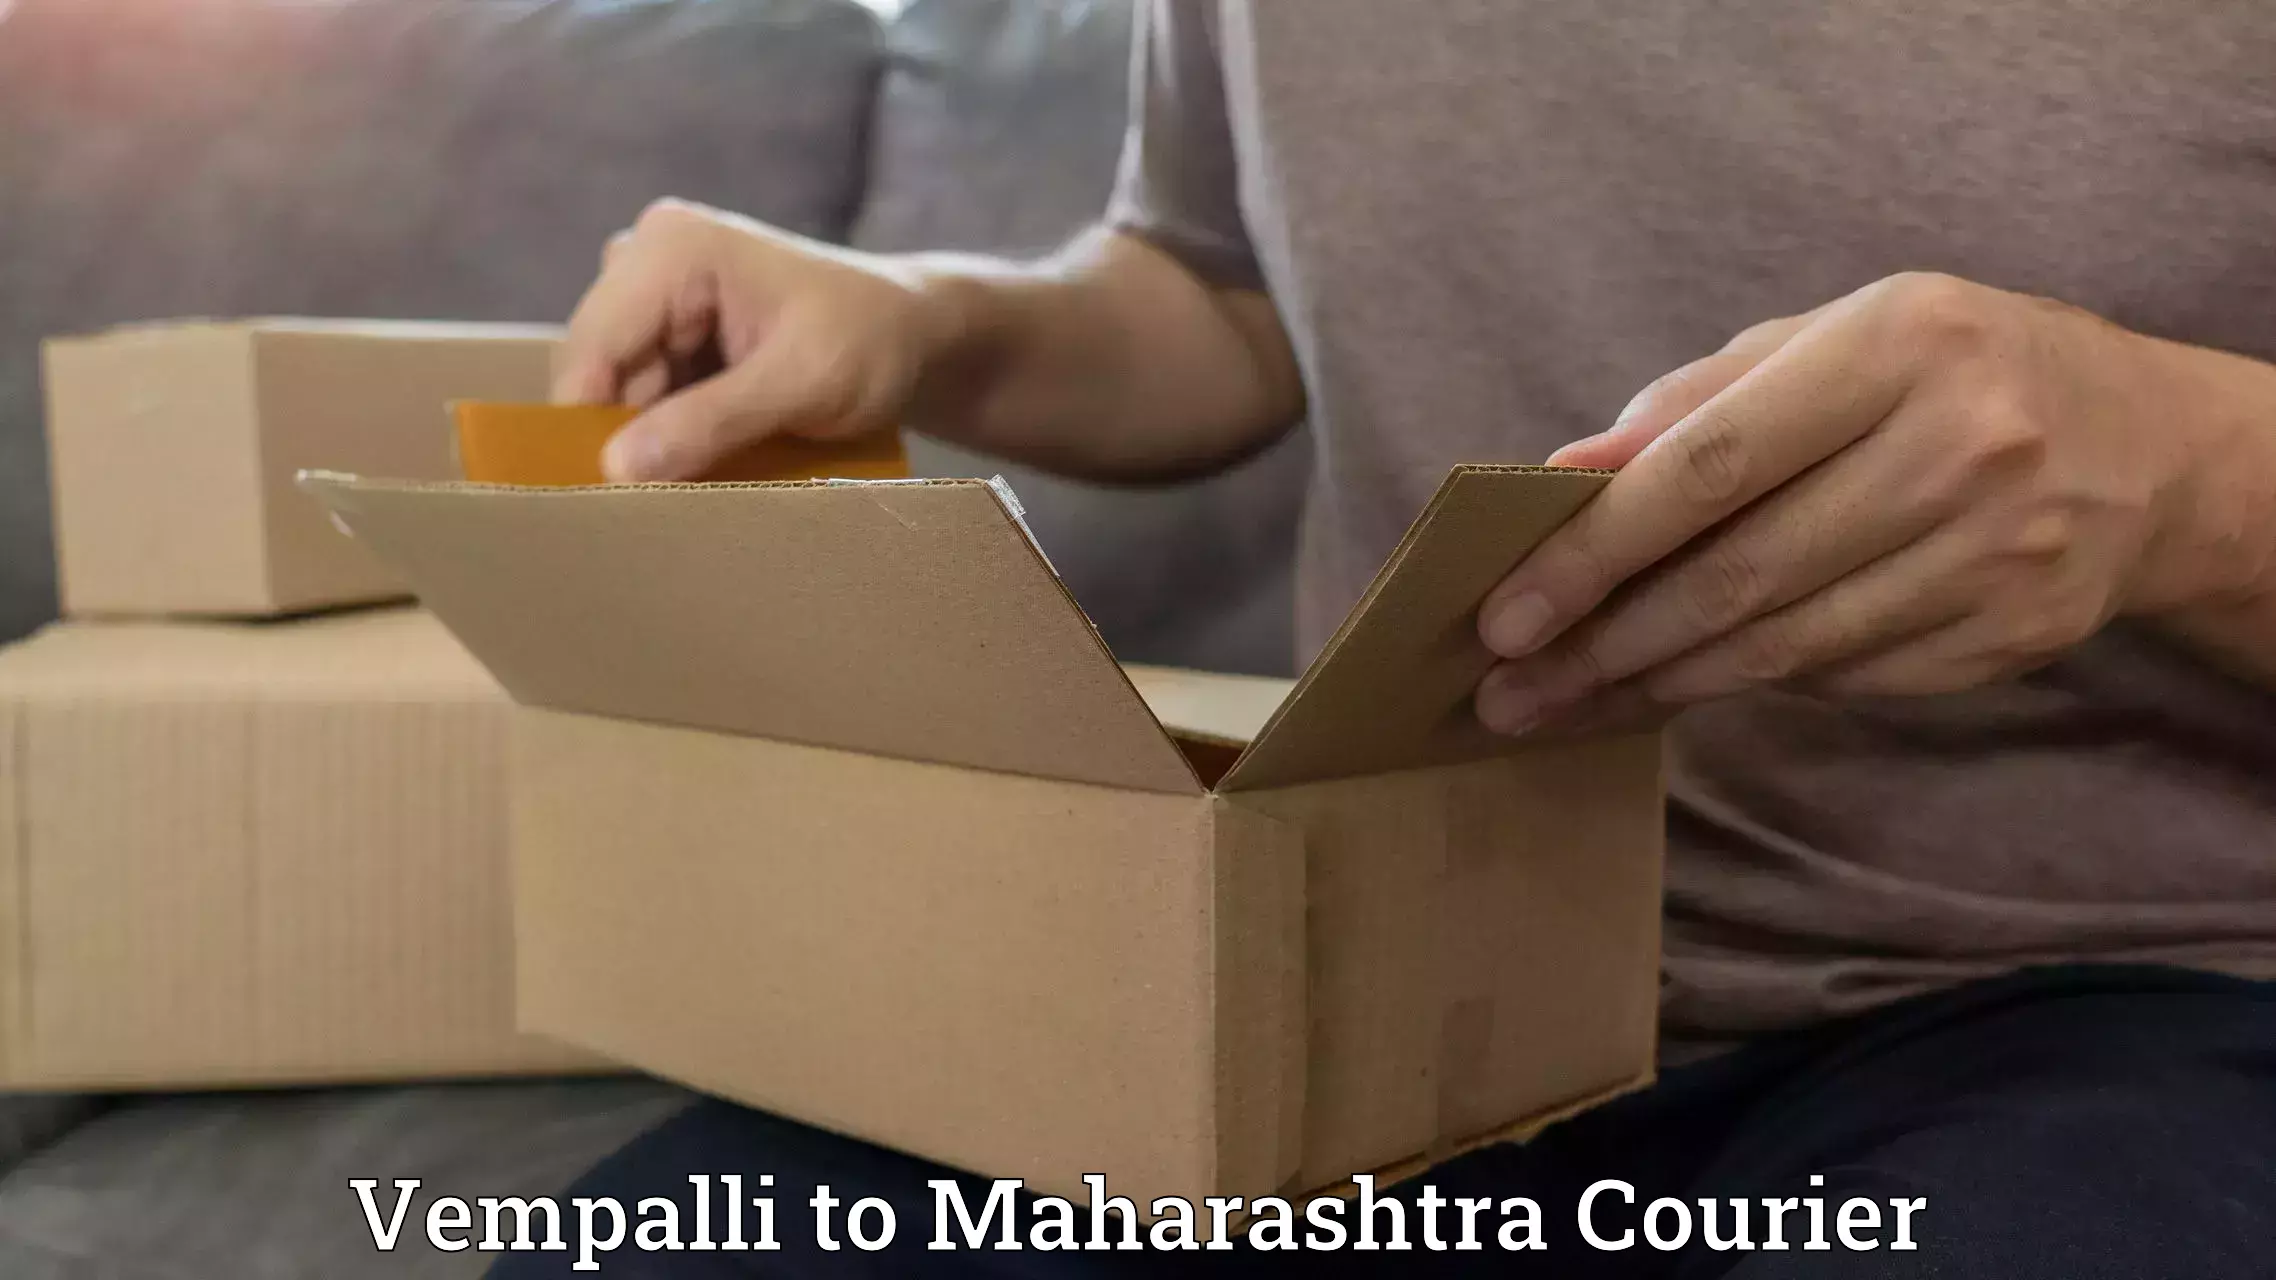 State-of-the-art courier technology Vempalli to Mahabaleshwar